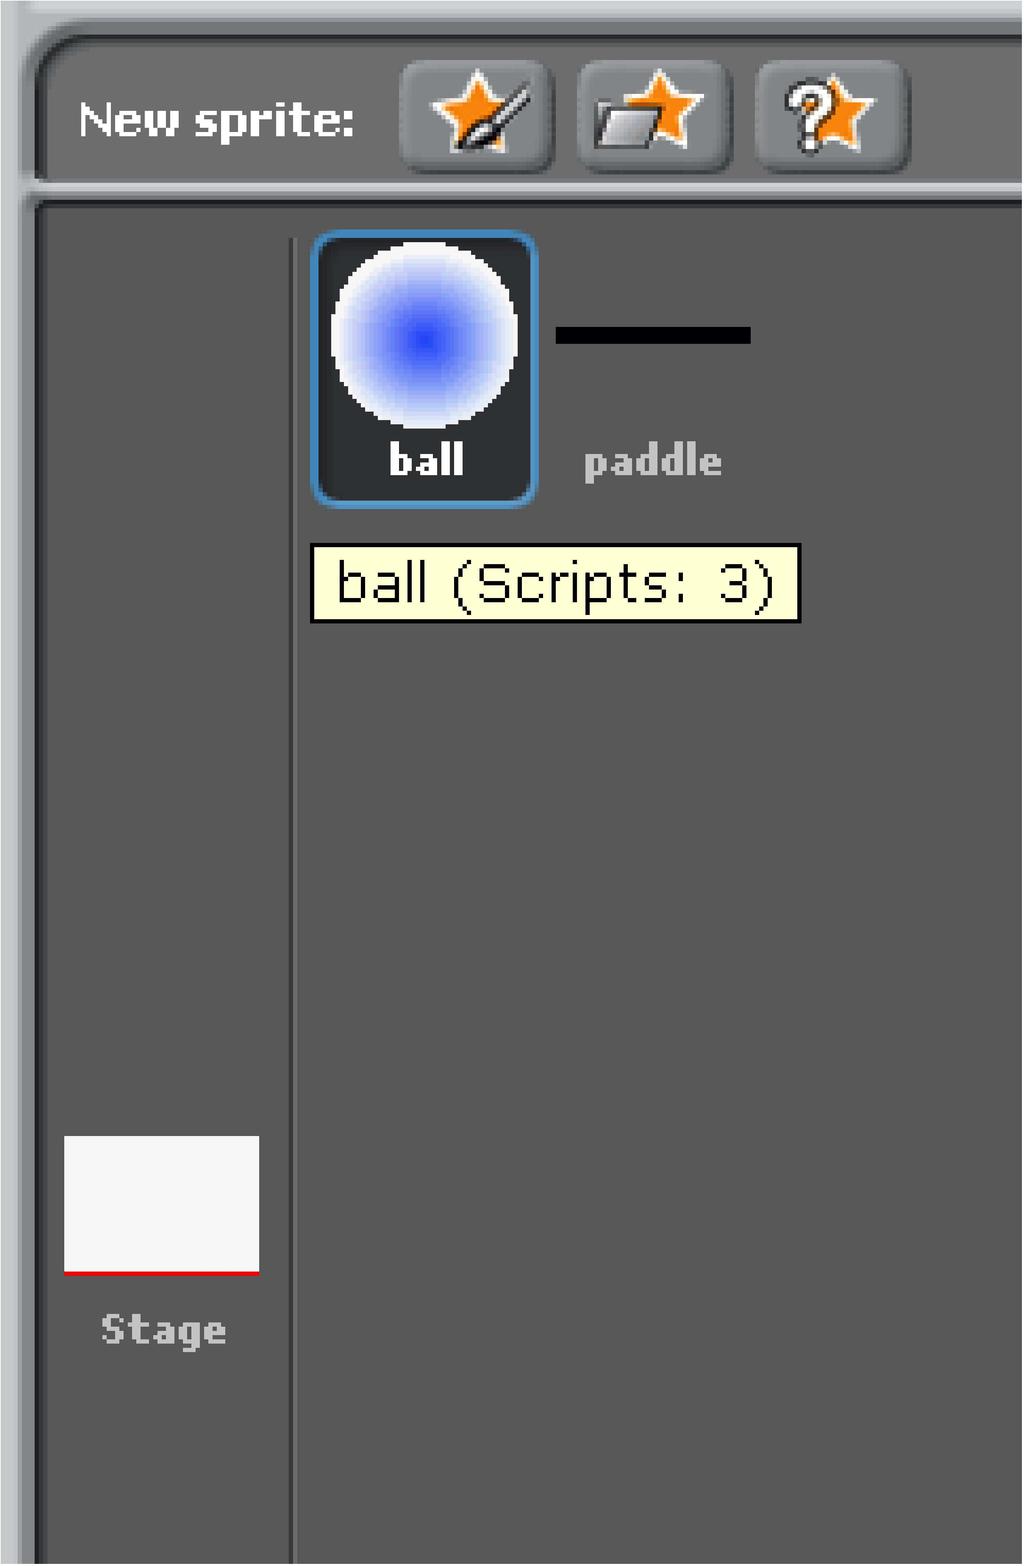 In Scratch, Sprites wear costumes. You can also create new sprites.